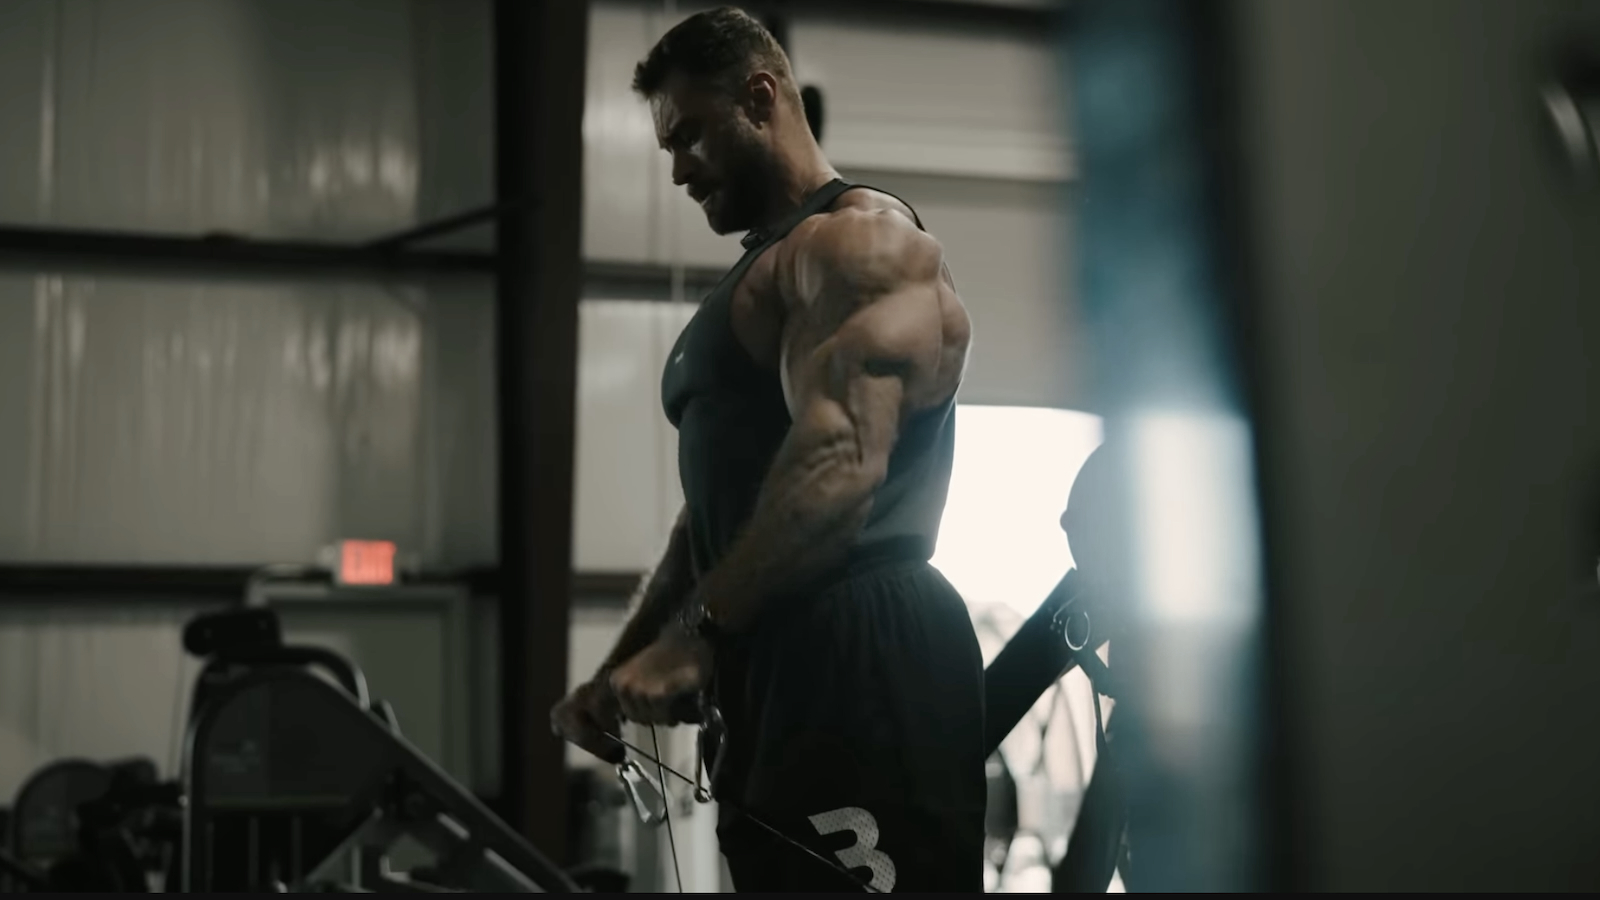 Chris Bumstead Trains Shoulders Two Weeks Out From Trying to Capture Fifth Consecutive Mr. Olympia Title